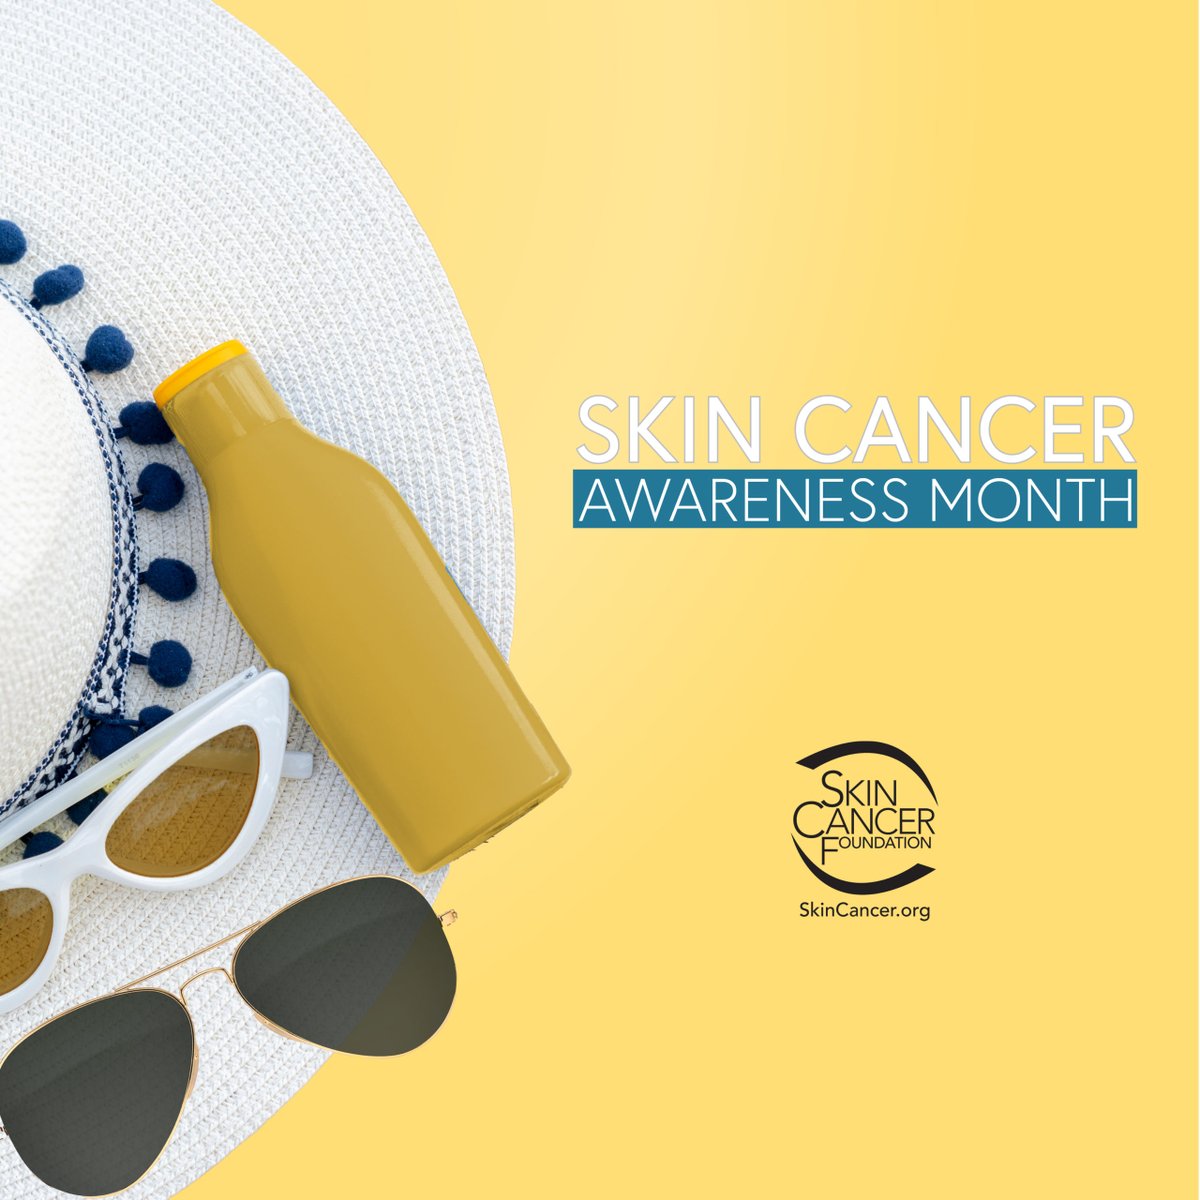 May is Skin Cancer Awareness Month. According to the Skin Cancer Foundation, skin cancer is the most common cancer in the United States, with more than 5 million cases identified annually. The good news is that it is also one of the most preventable forms of cancer☀️